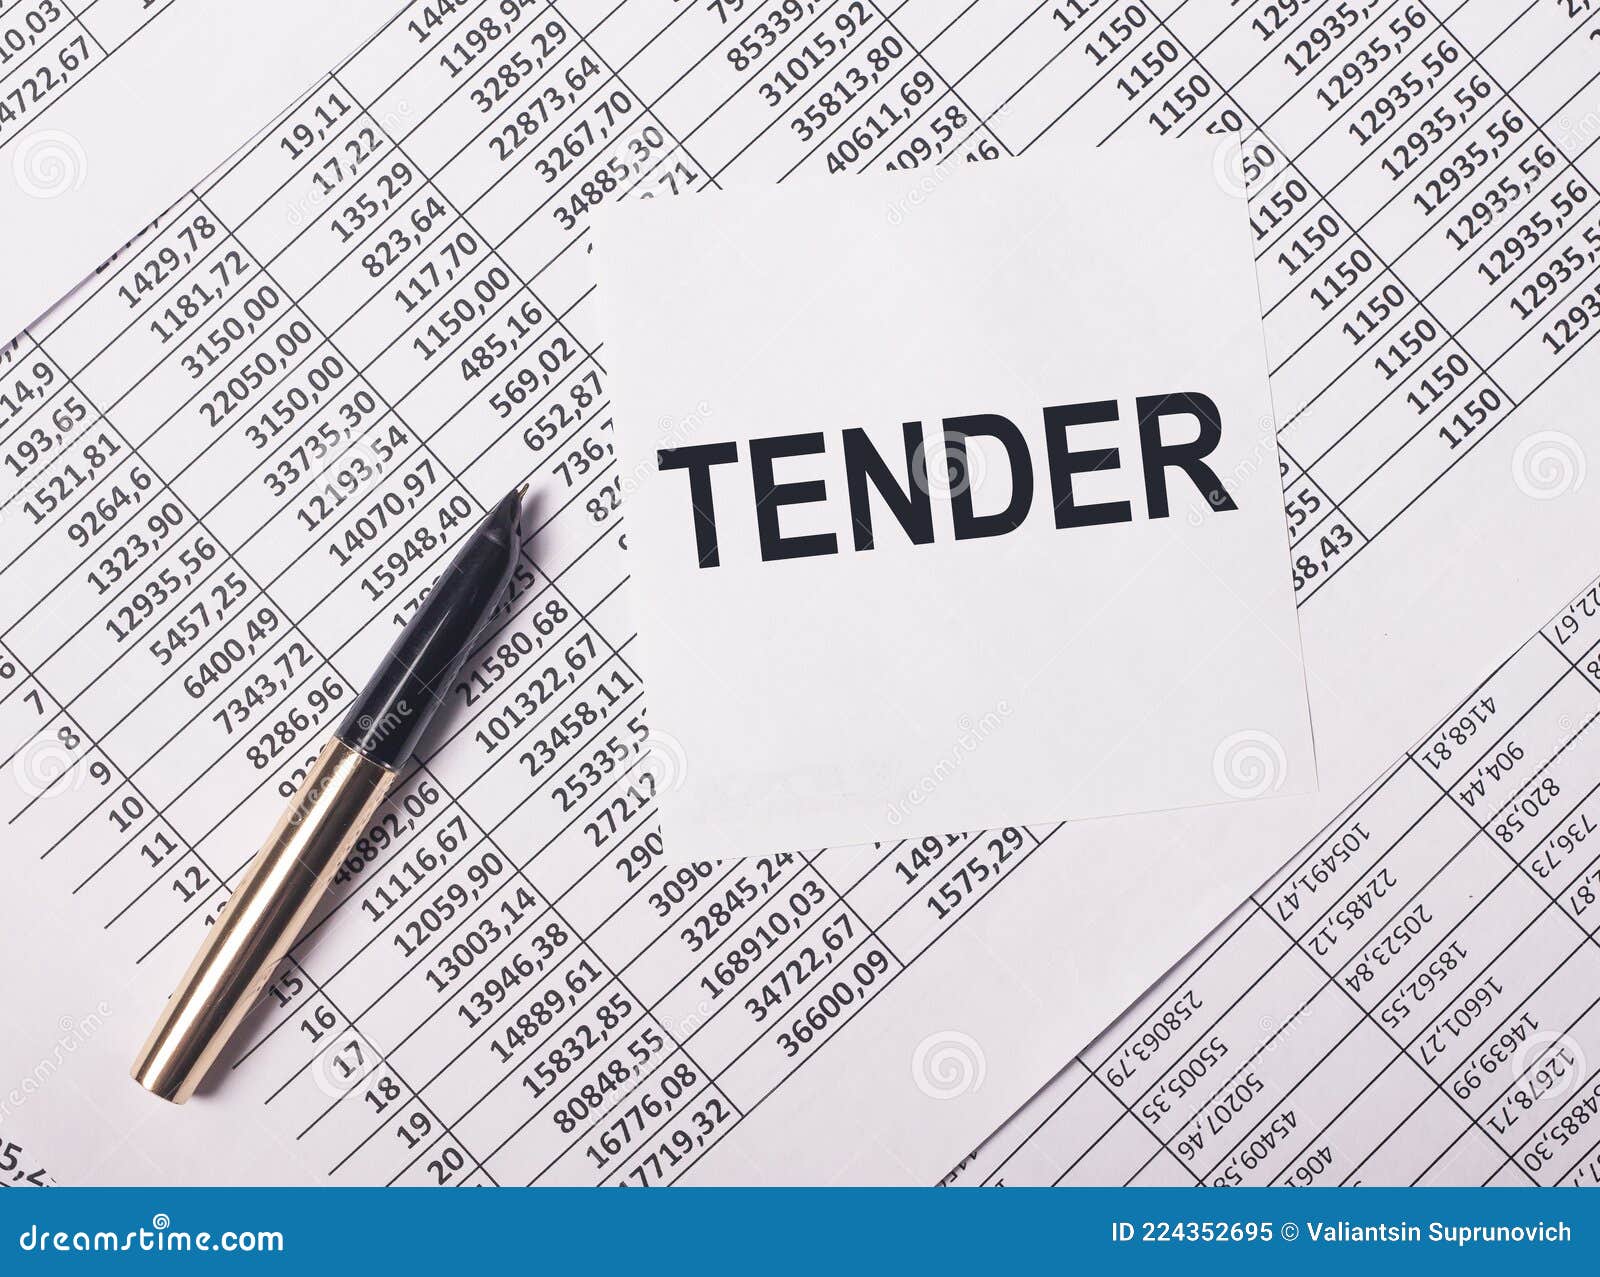 inscription tender on paper note over business financial papers